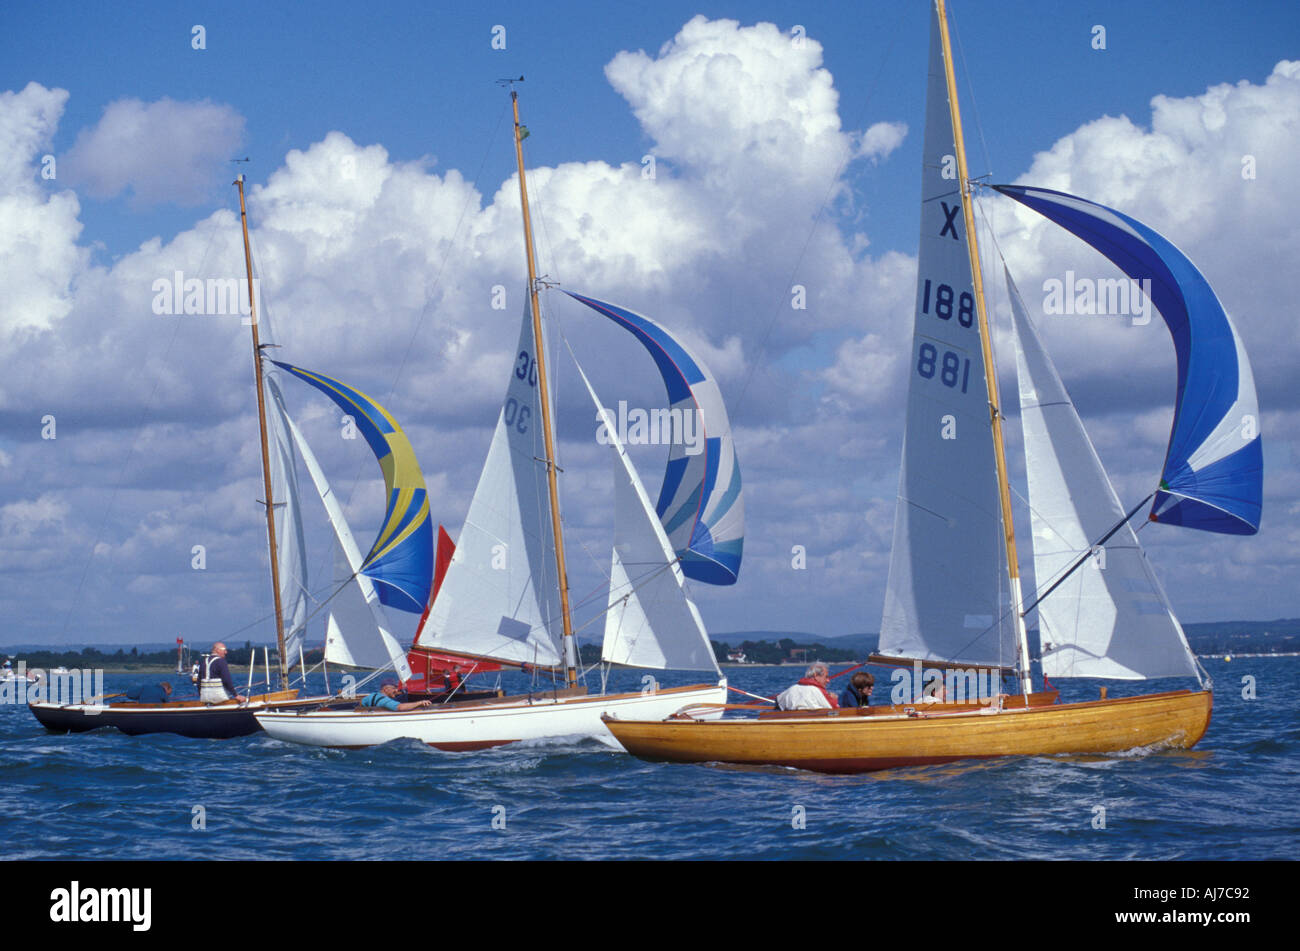 X boats racing in the Solent UK Stock Photo